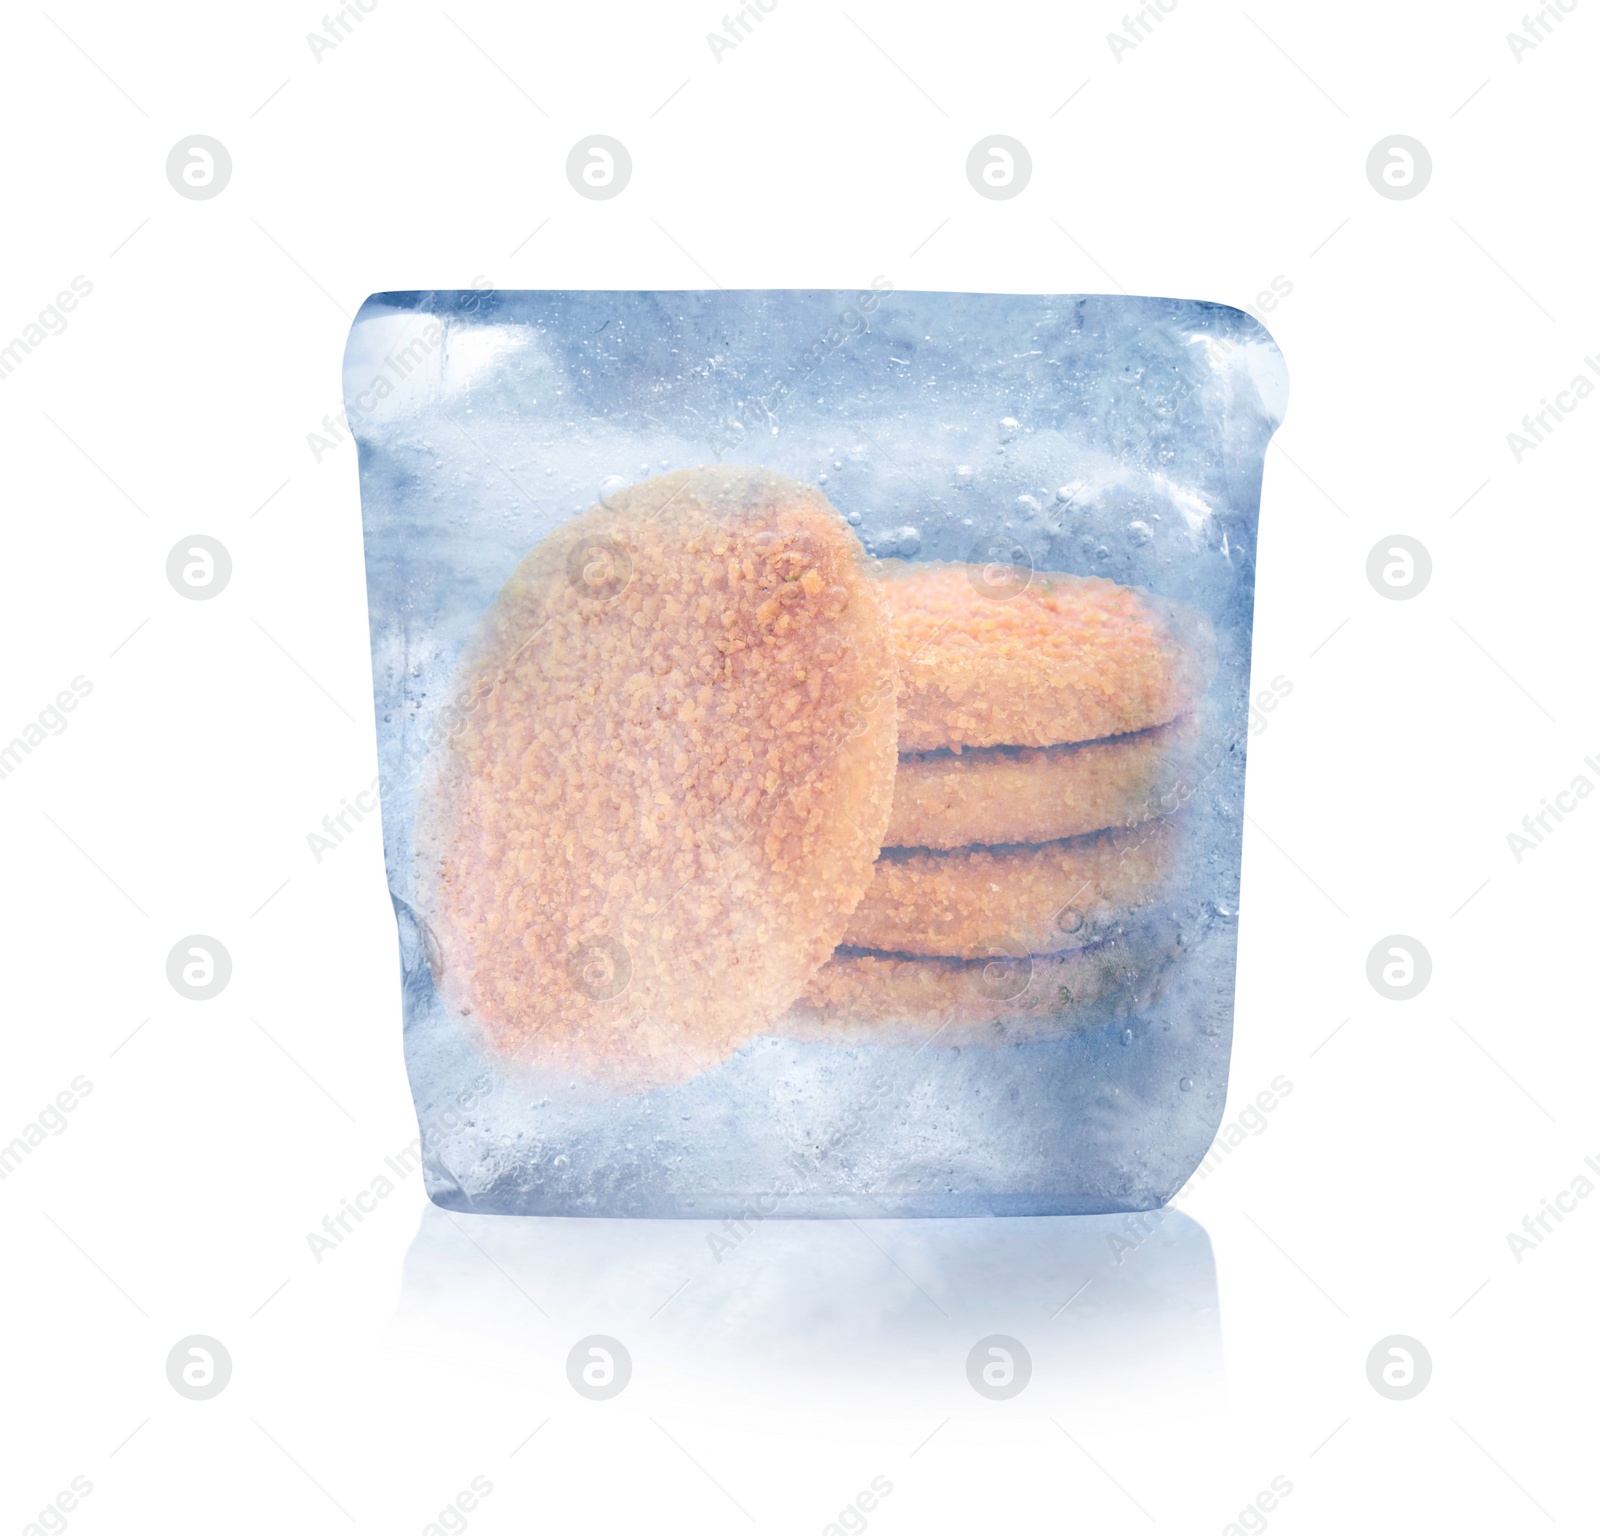 Image of Frozen food. Uncooked cutlets in ice cube isolated on white